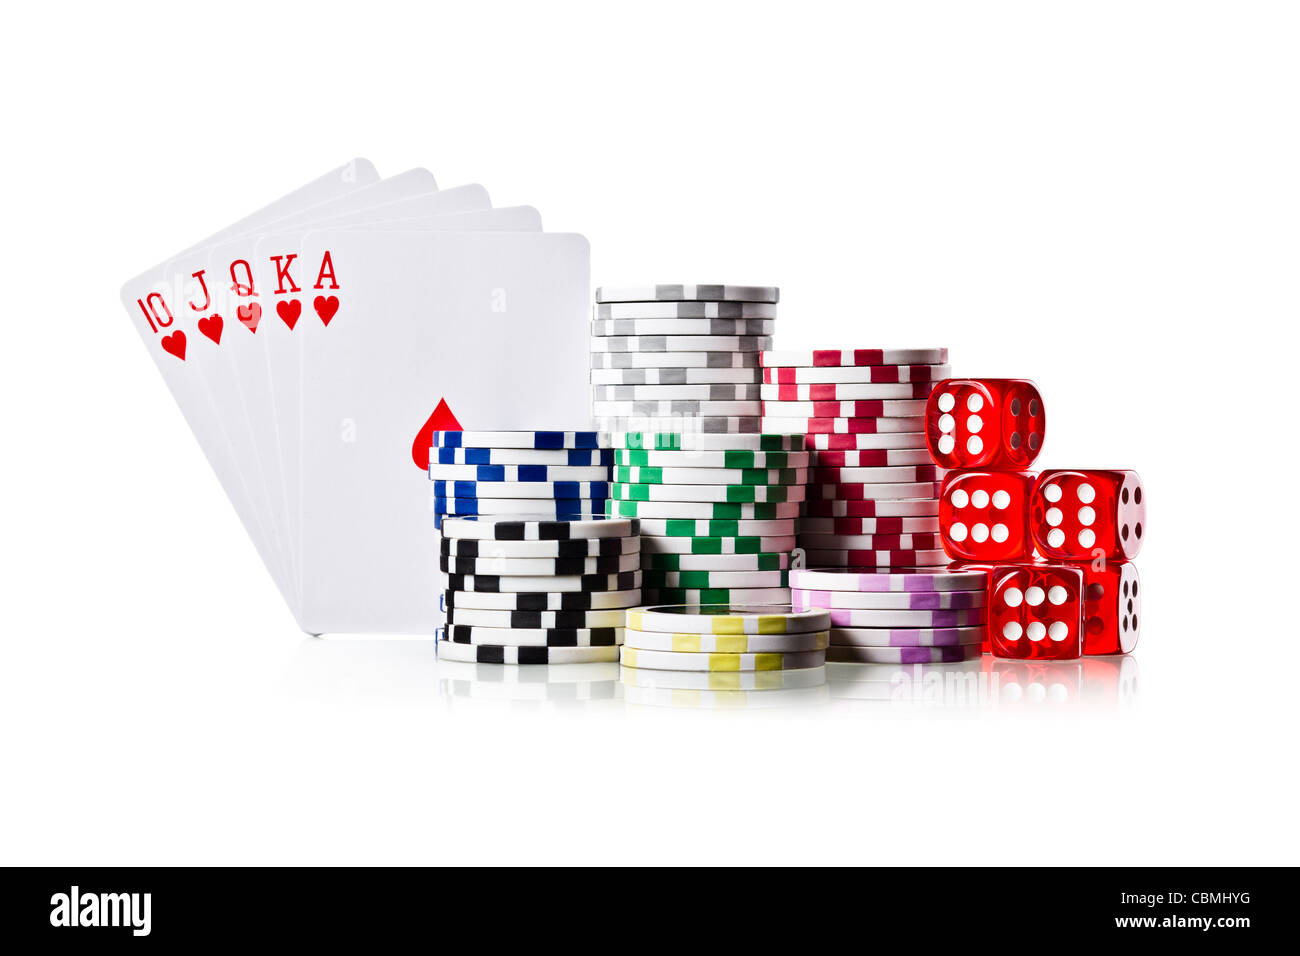 Poker chips stacked up on a winning hand. Stock Photo